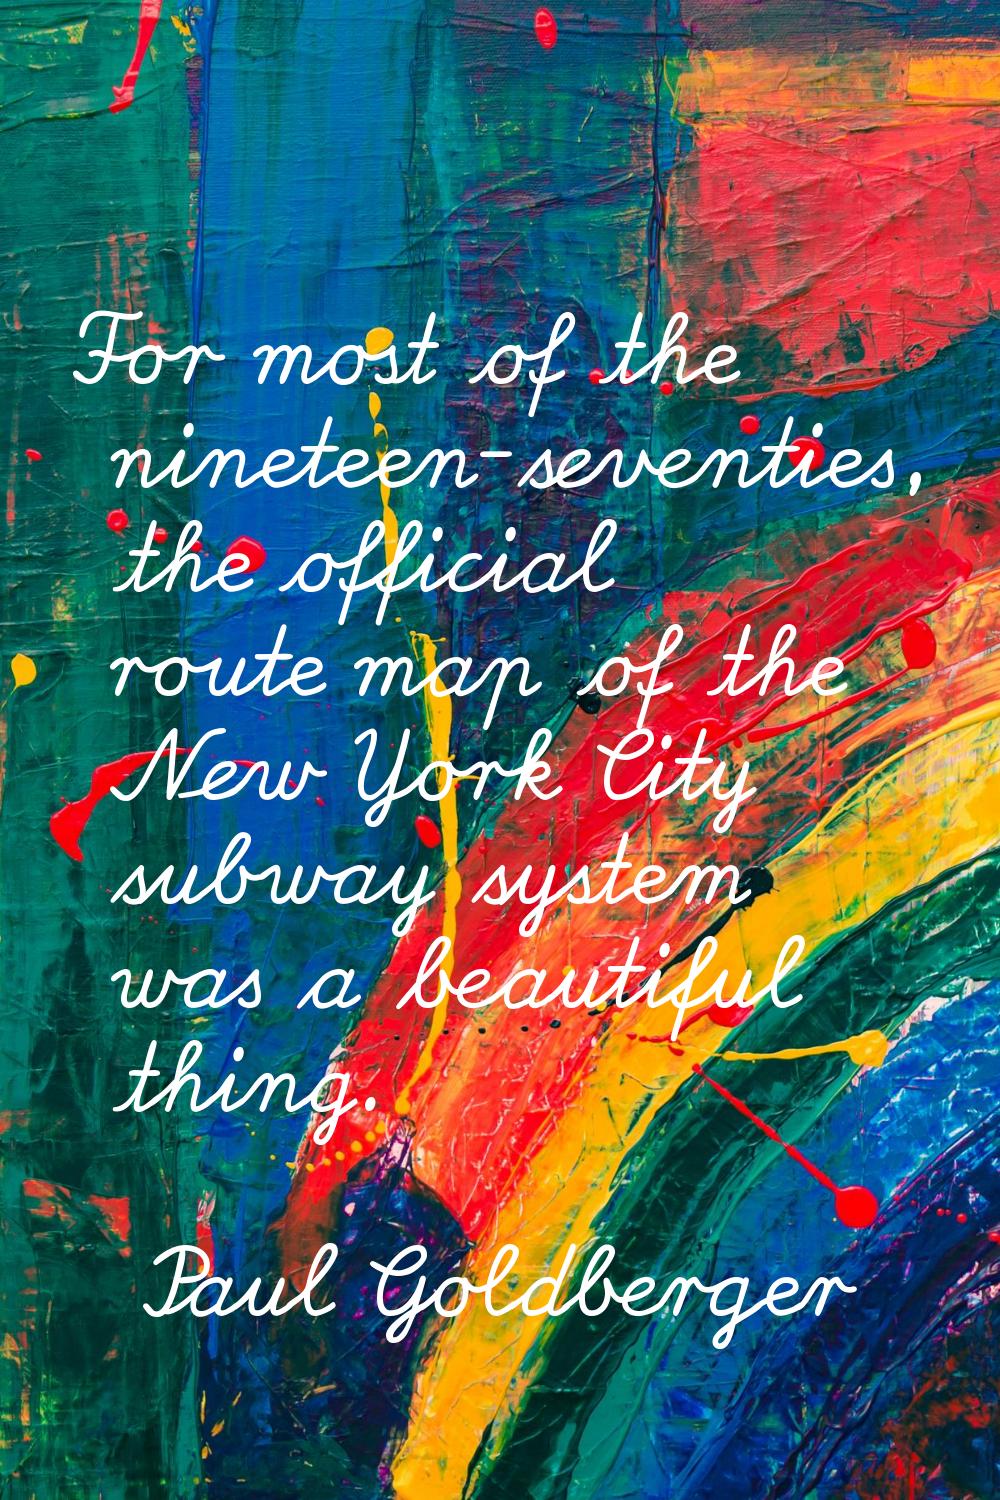 For most of the nineteen-seventies, the official route map of the New York City subway system was a